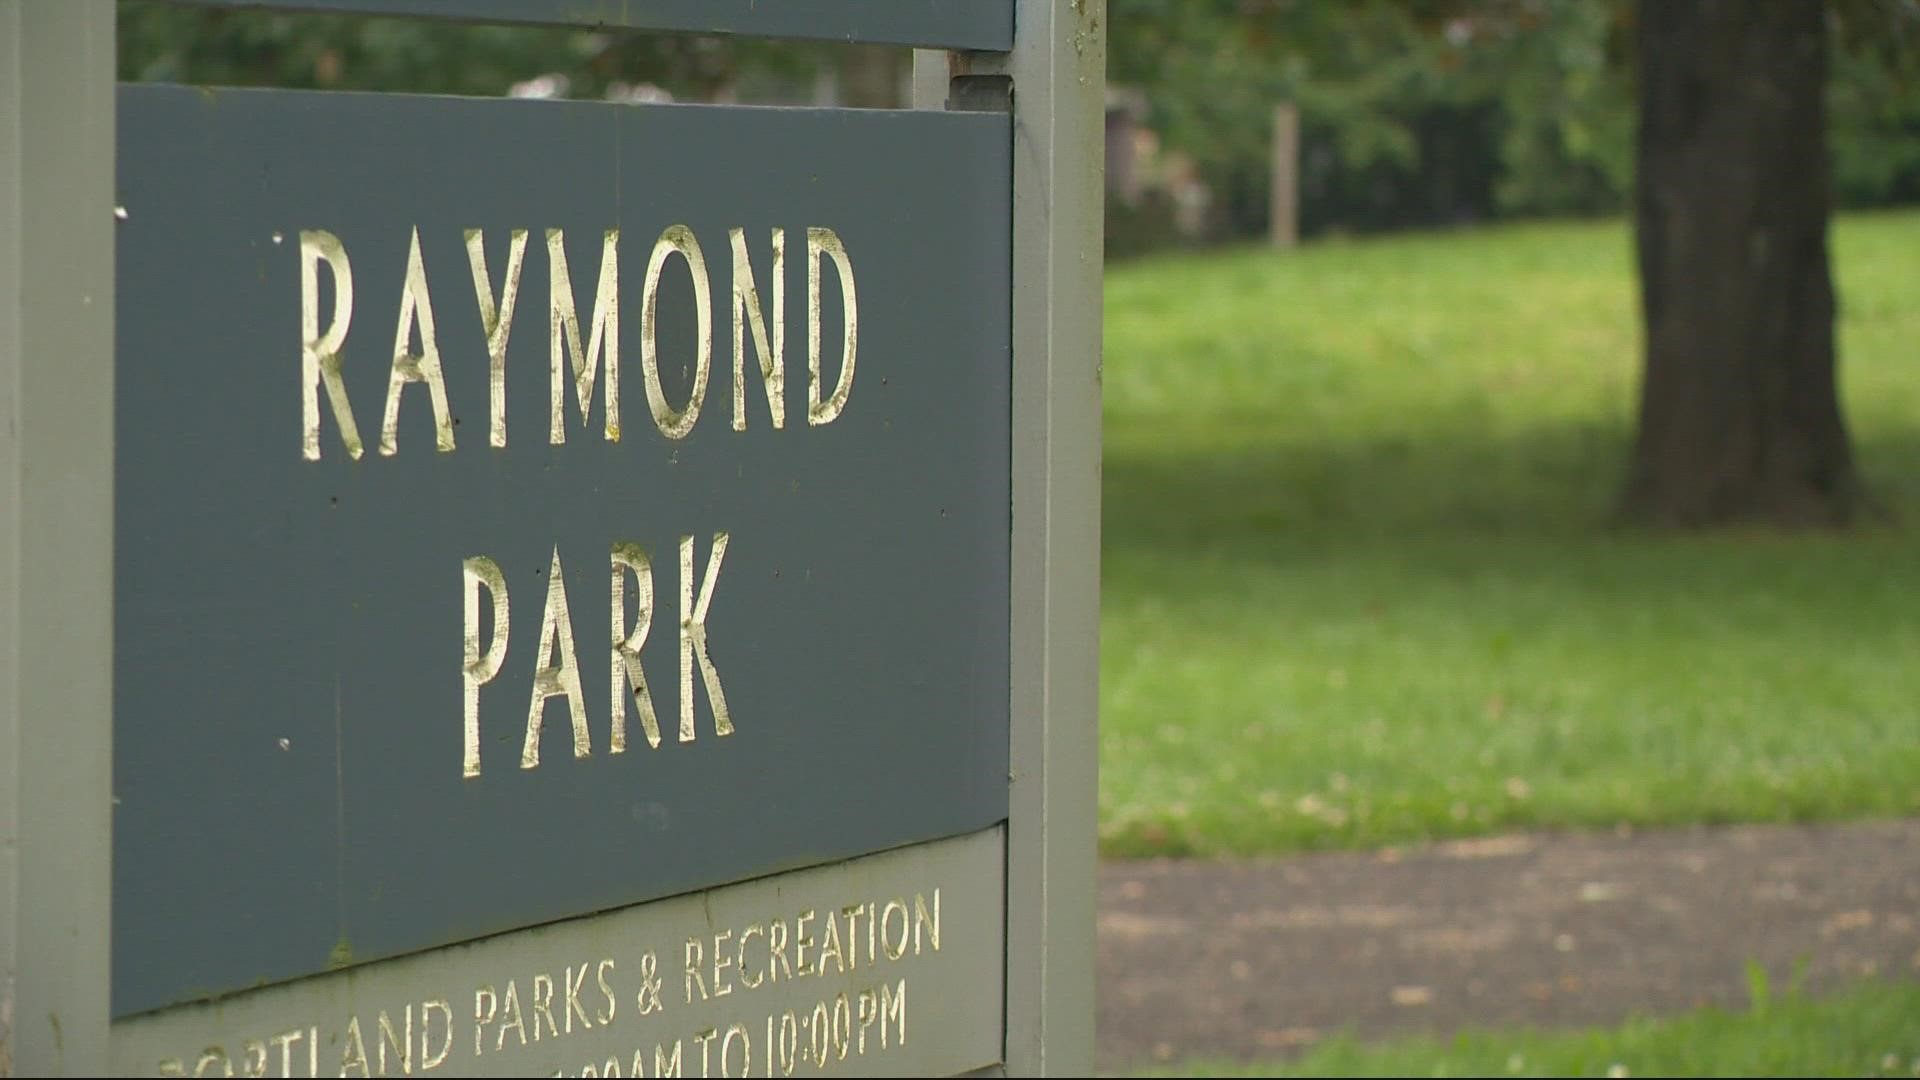 Police say a man died after a shooting at Raymond Park. A second person was found dead near the corner of NE 81st and